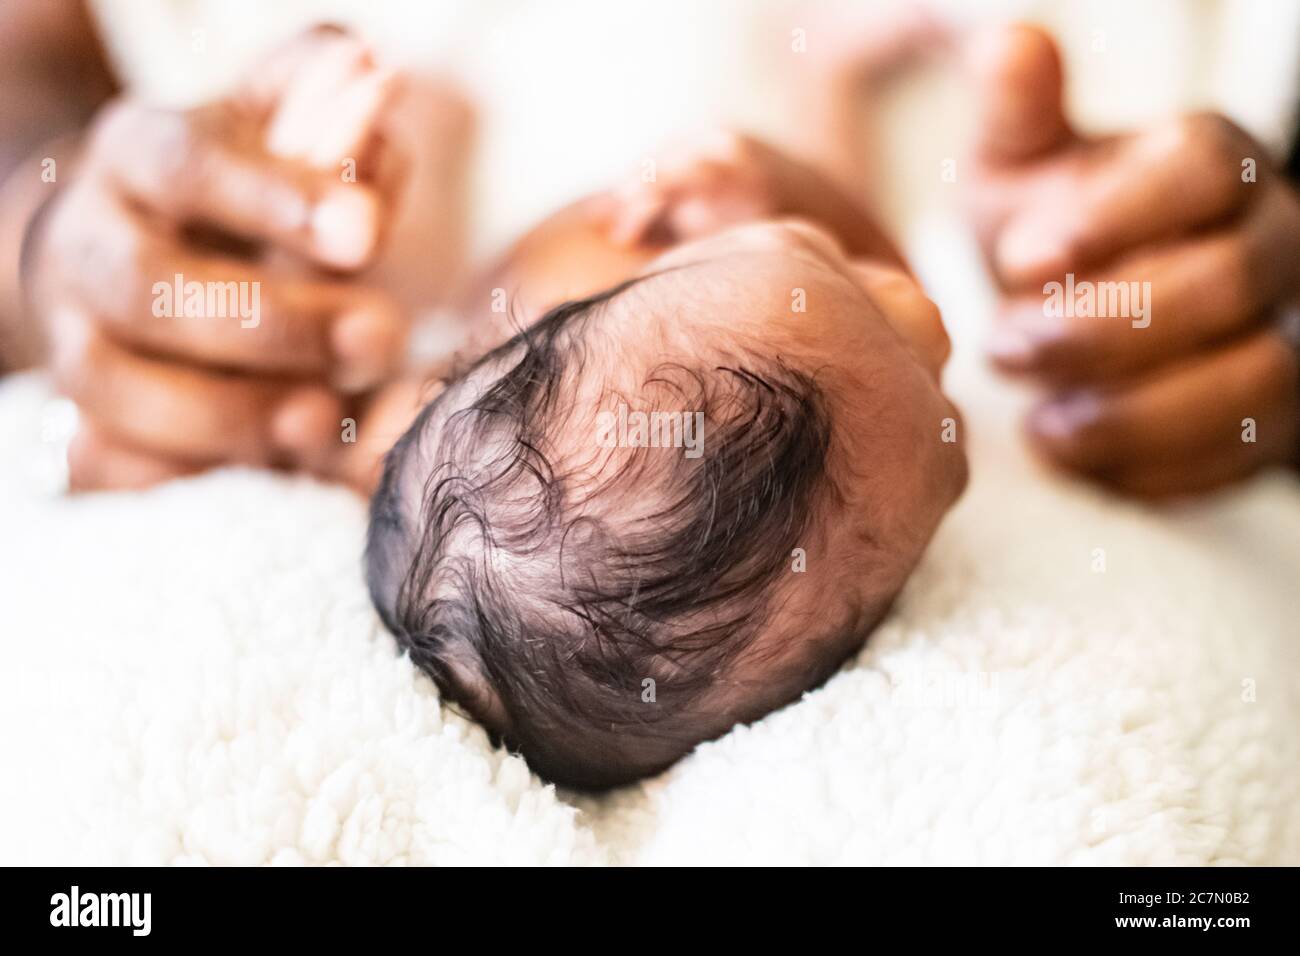 View of African American baby infant girl with focus on the top of her head while father holds her hands in his. Stock Photo